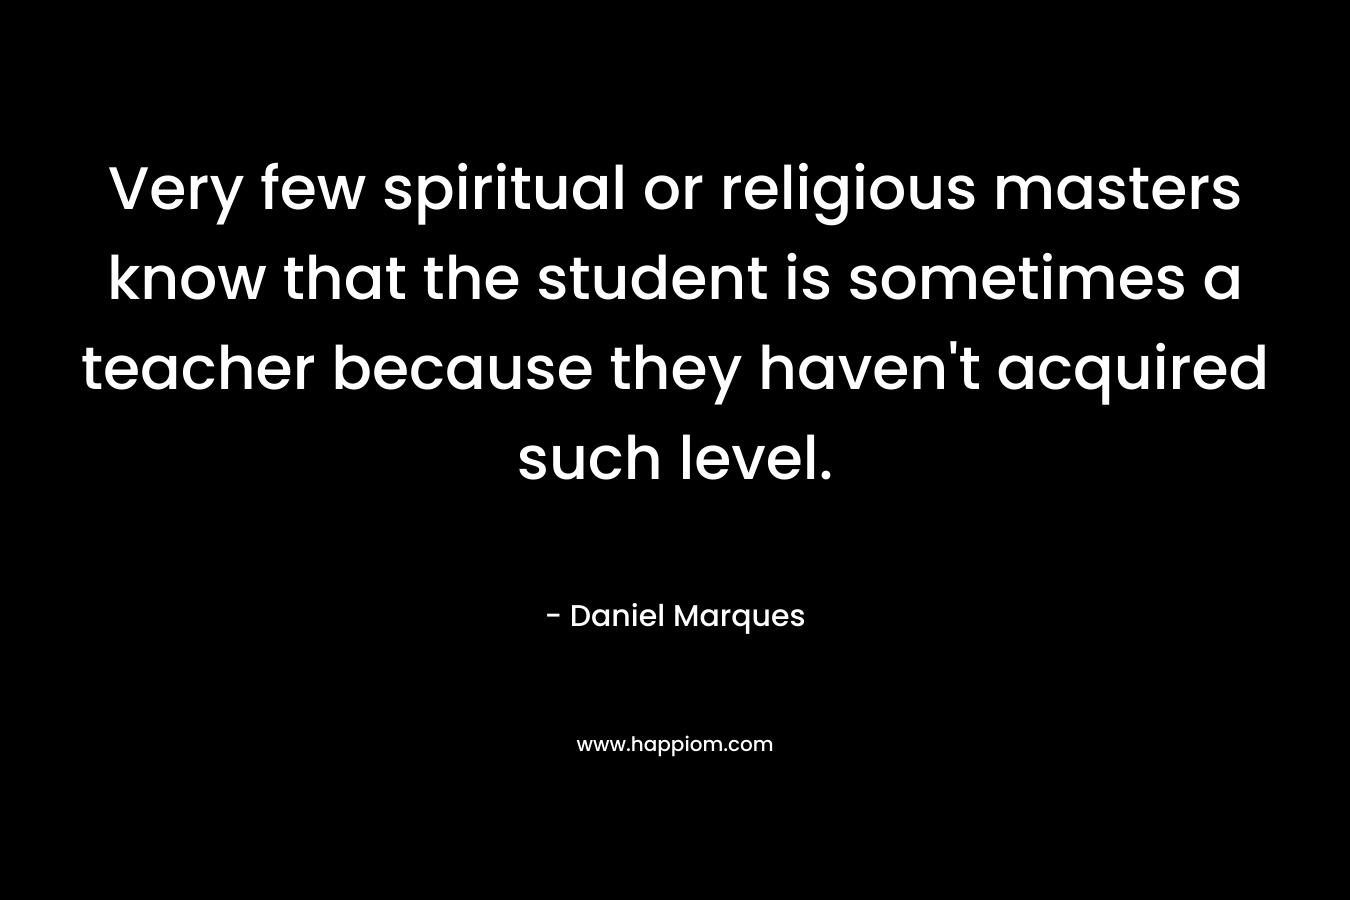 Very few spiritual or religious masters know that the student is sometimes a teacher because they haven't acquired such level.